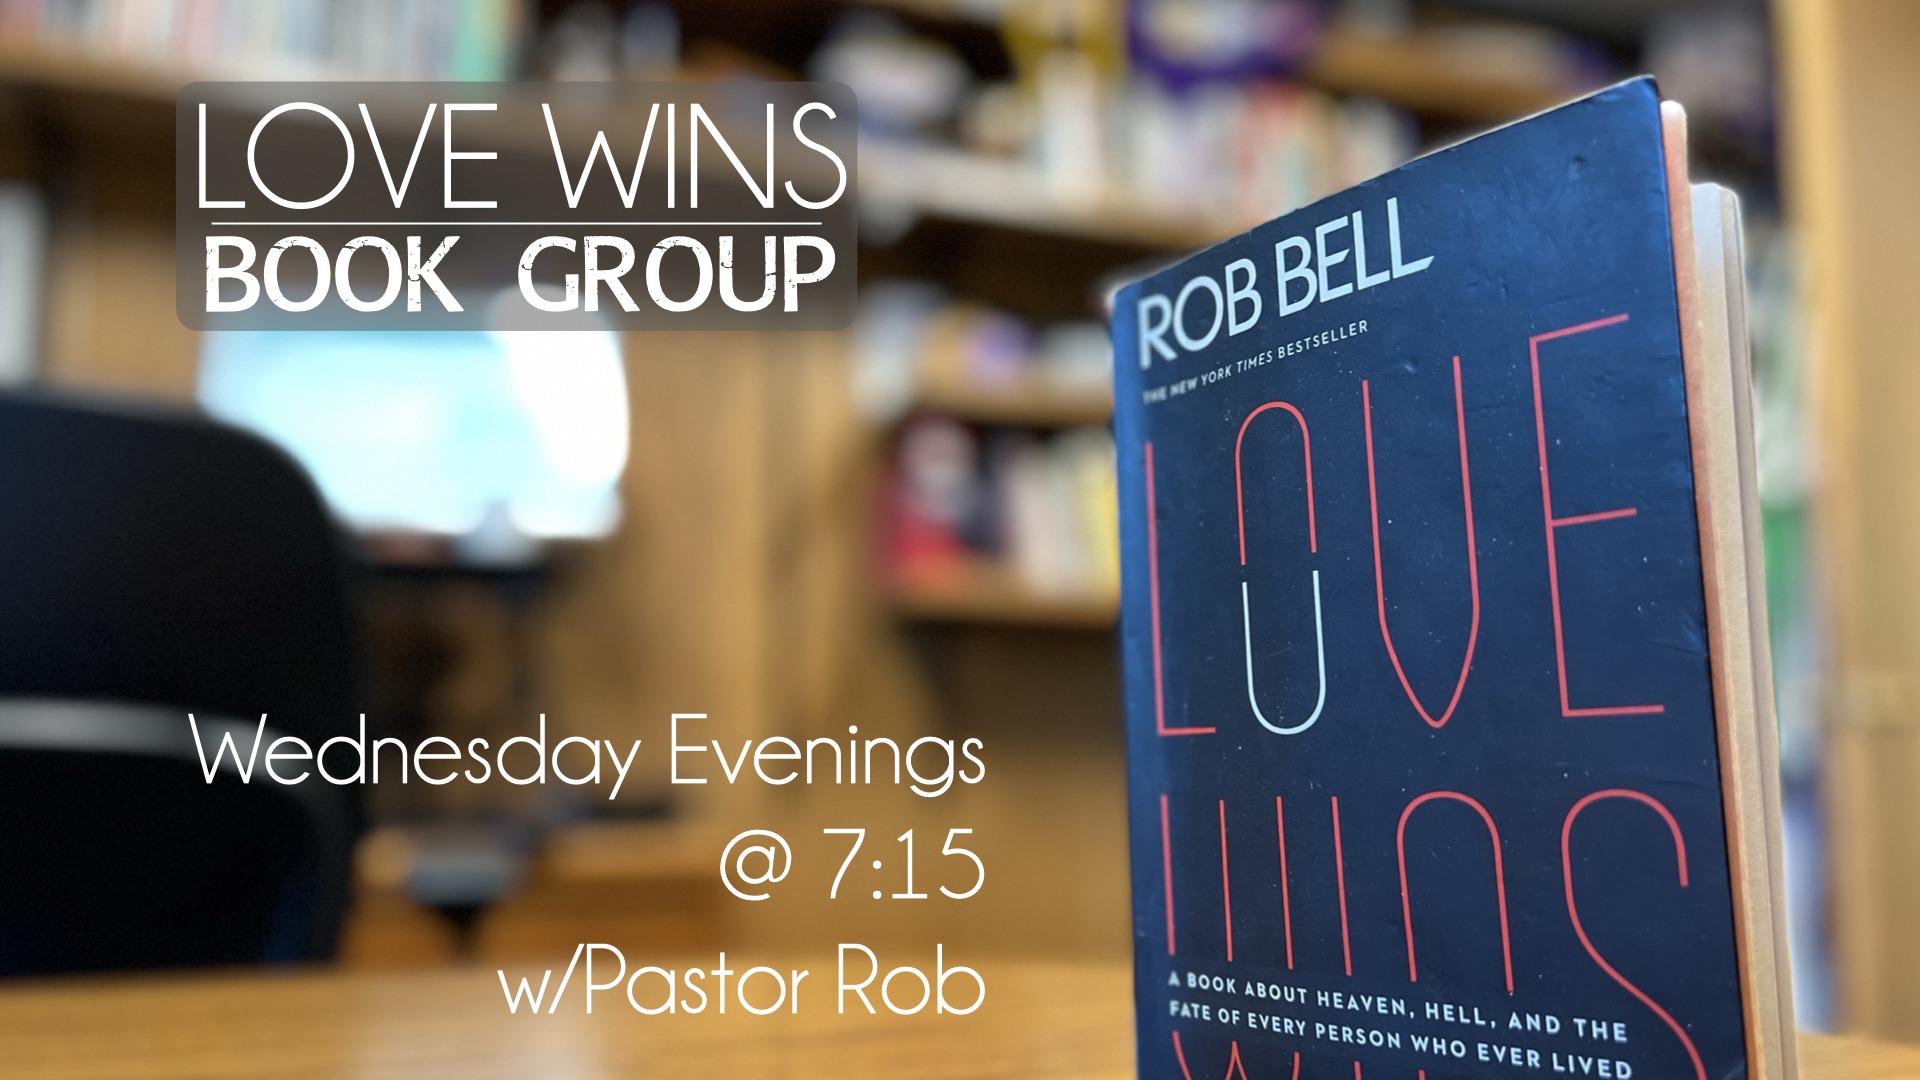 LOVE WINS Book Group